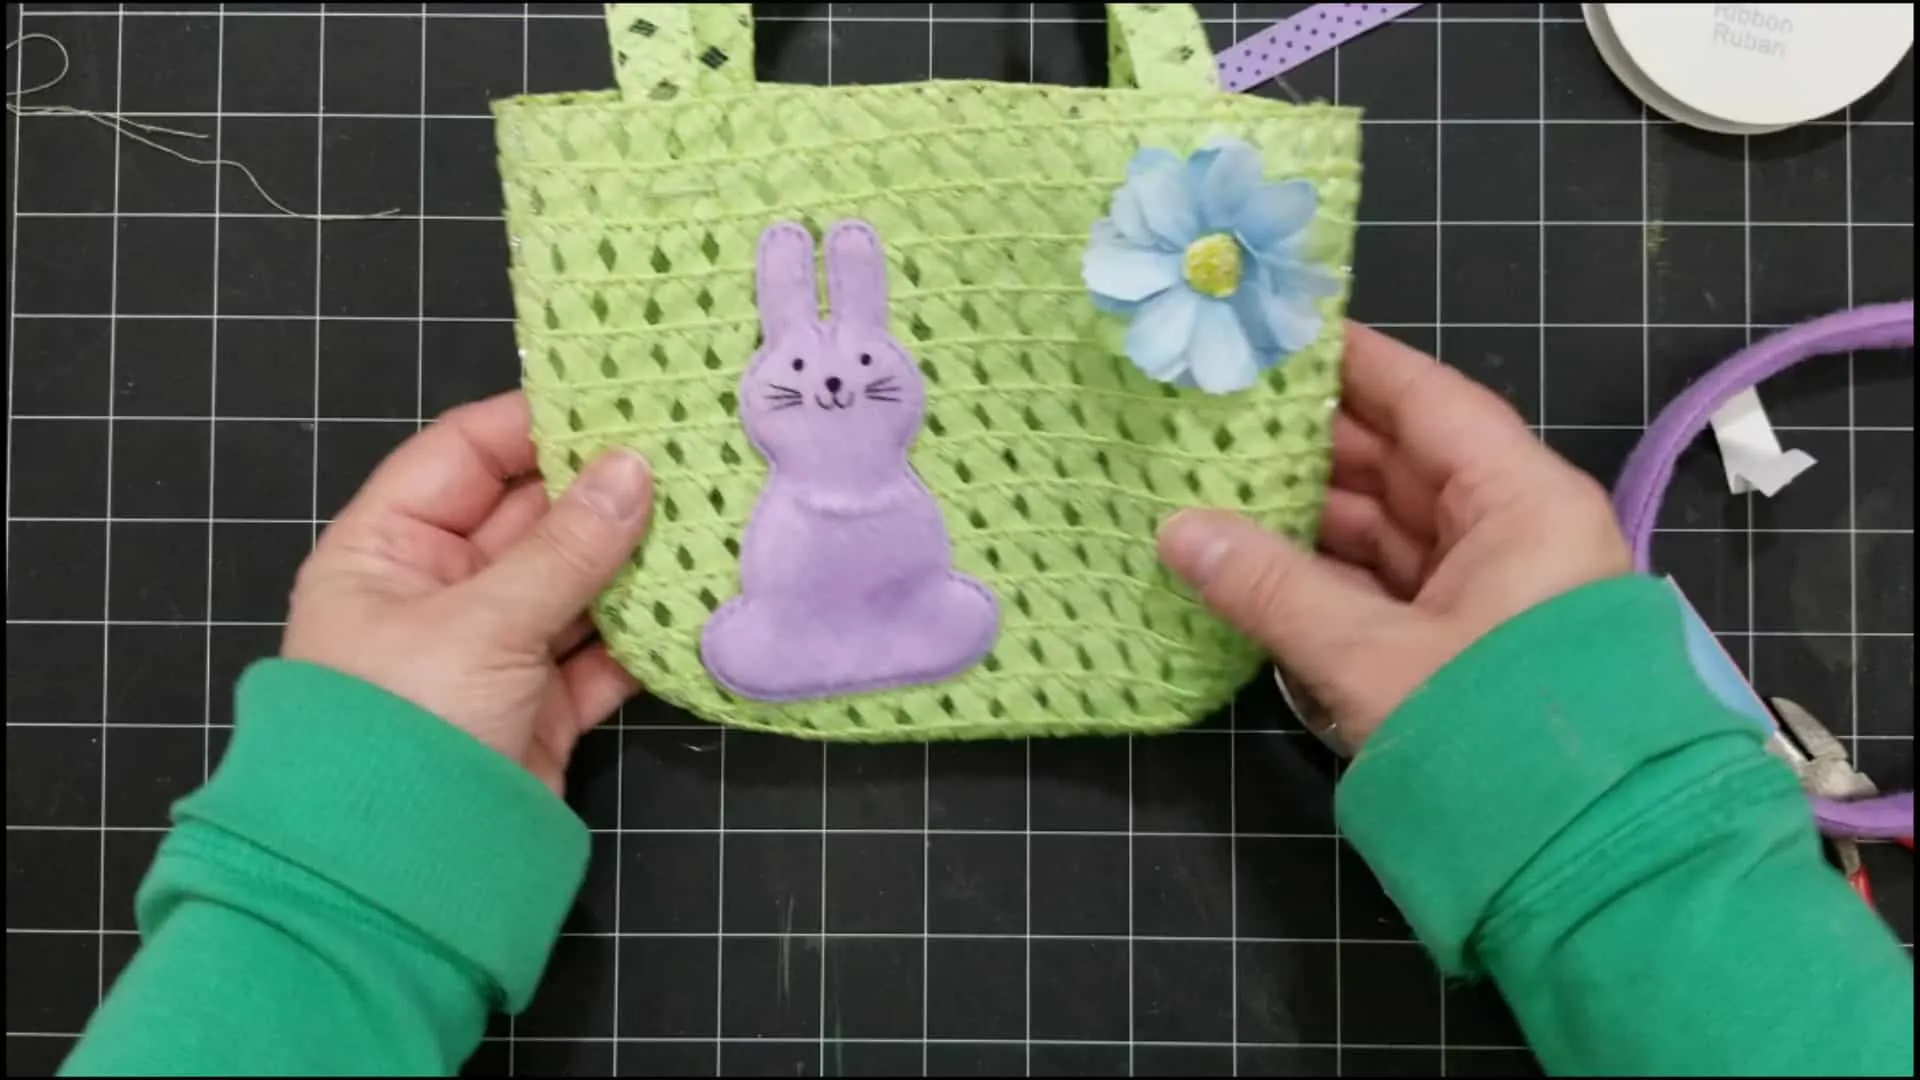 Front of little Easter purse with the purple bunny glued to the front.